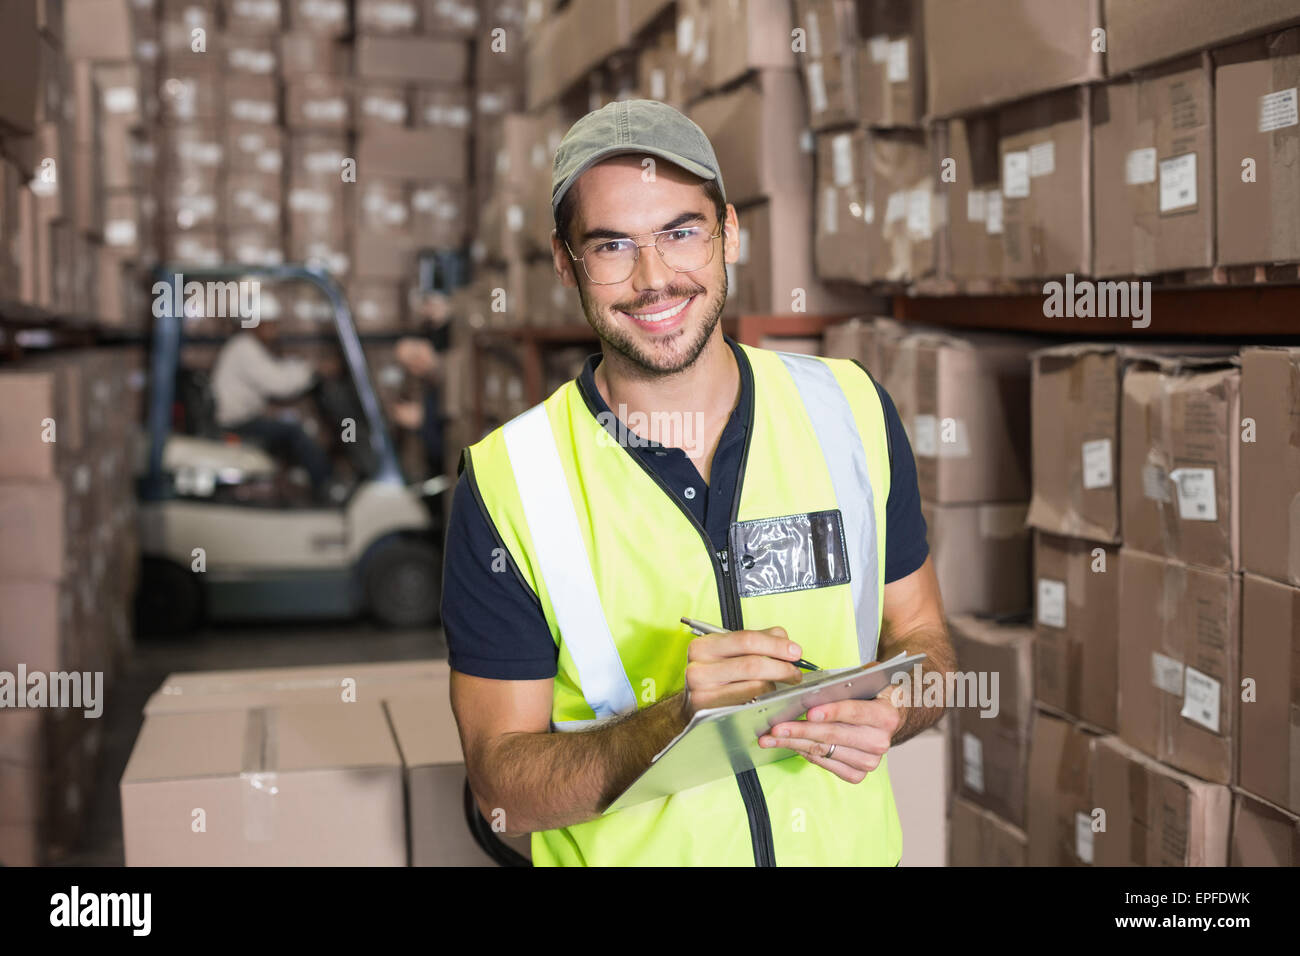 Warehouse worker smiling at camera with clipboard Stock Photo